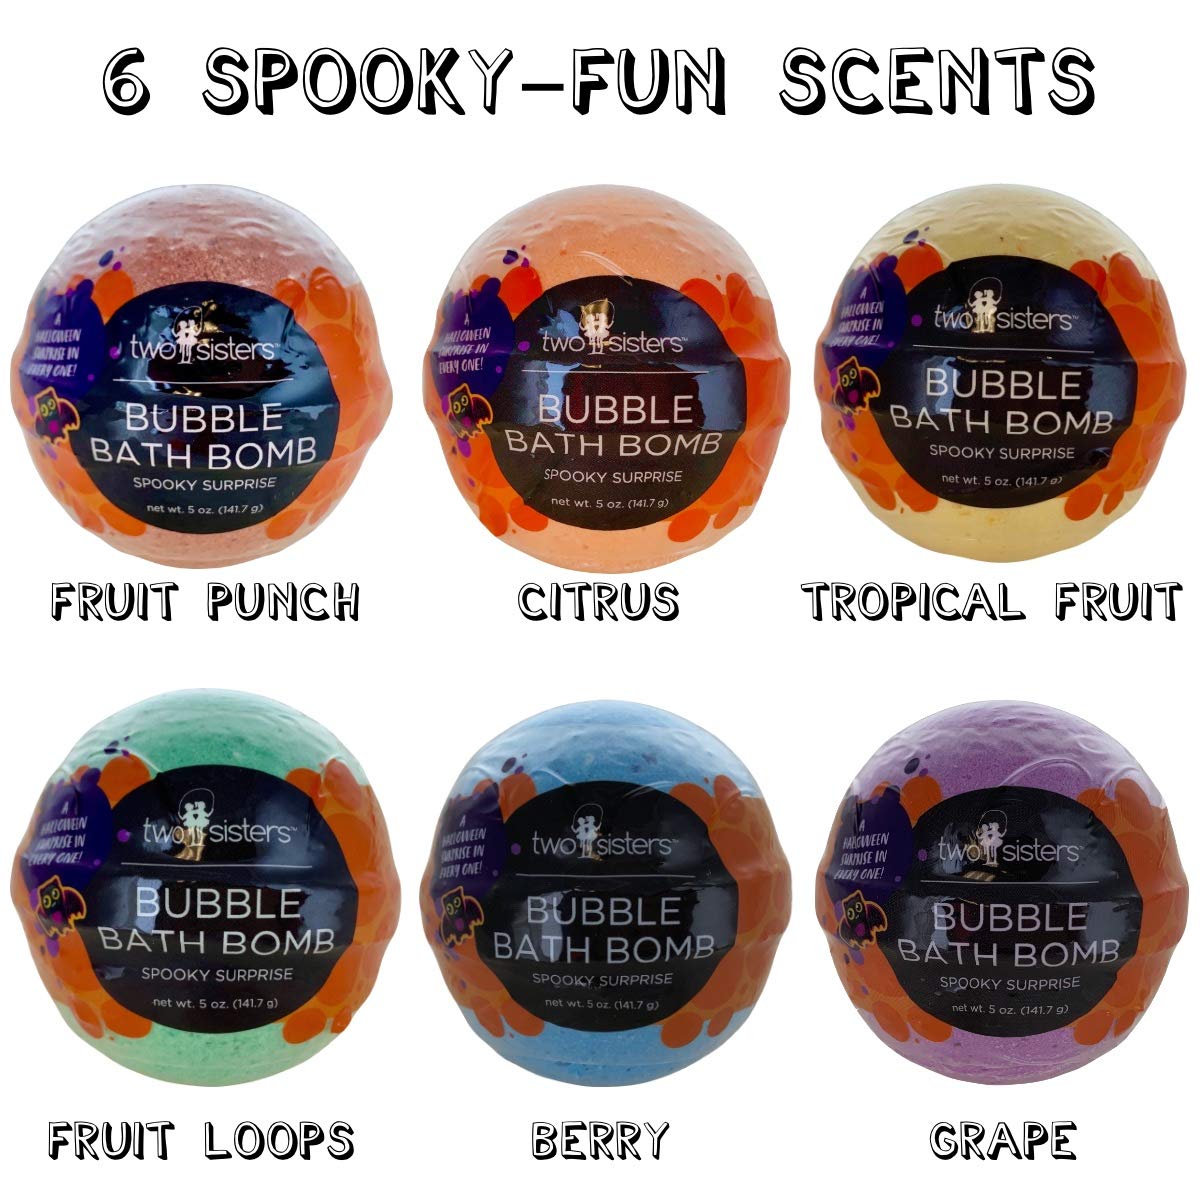 Spooky Bath Bombs for Kids with Surprise Inside, Bubble Bath Bomb with Halloween Toys, Fruity Scents, Relaxing Aromas, USA Made, Ideal Birthday Gift for Girls & Boys - 6 Pack by Two Sisters